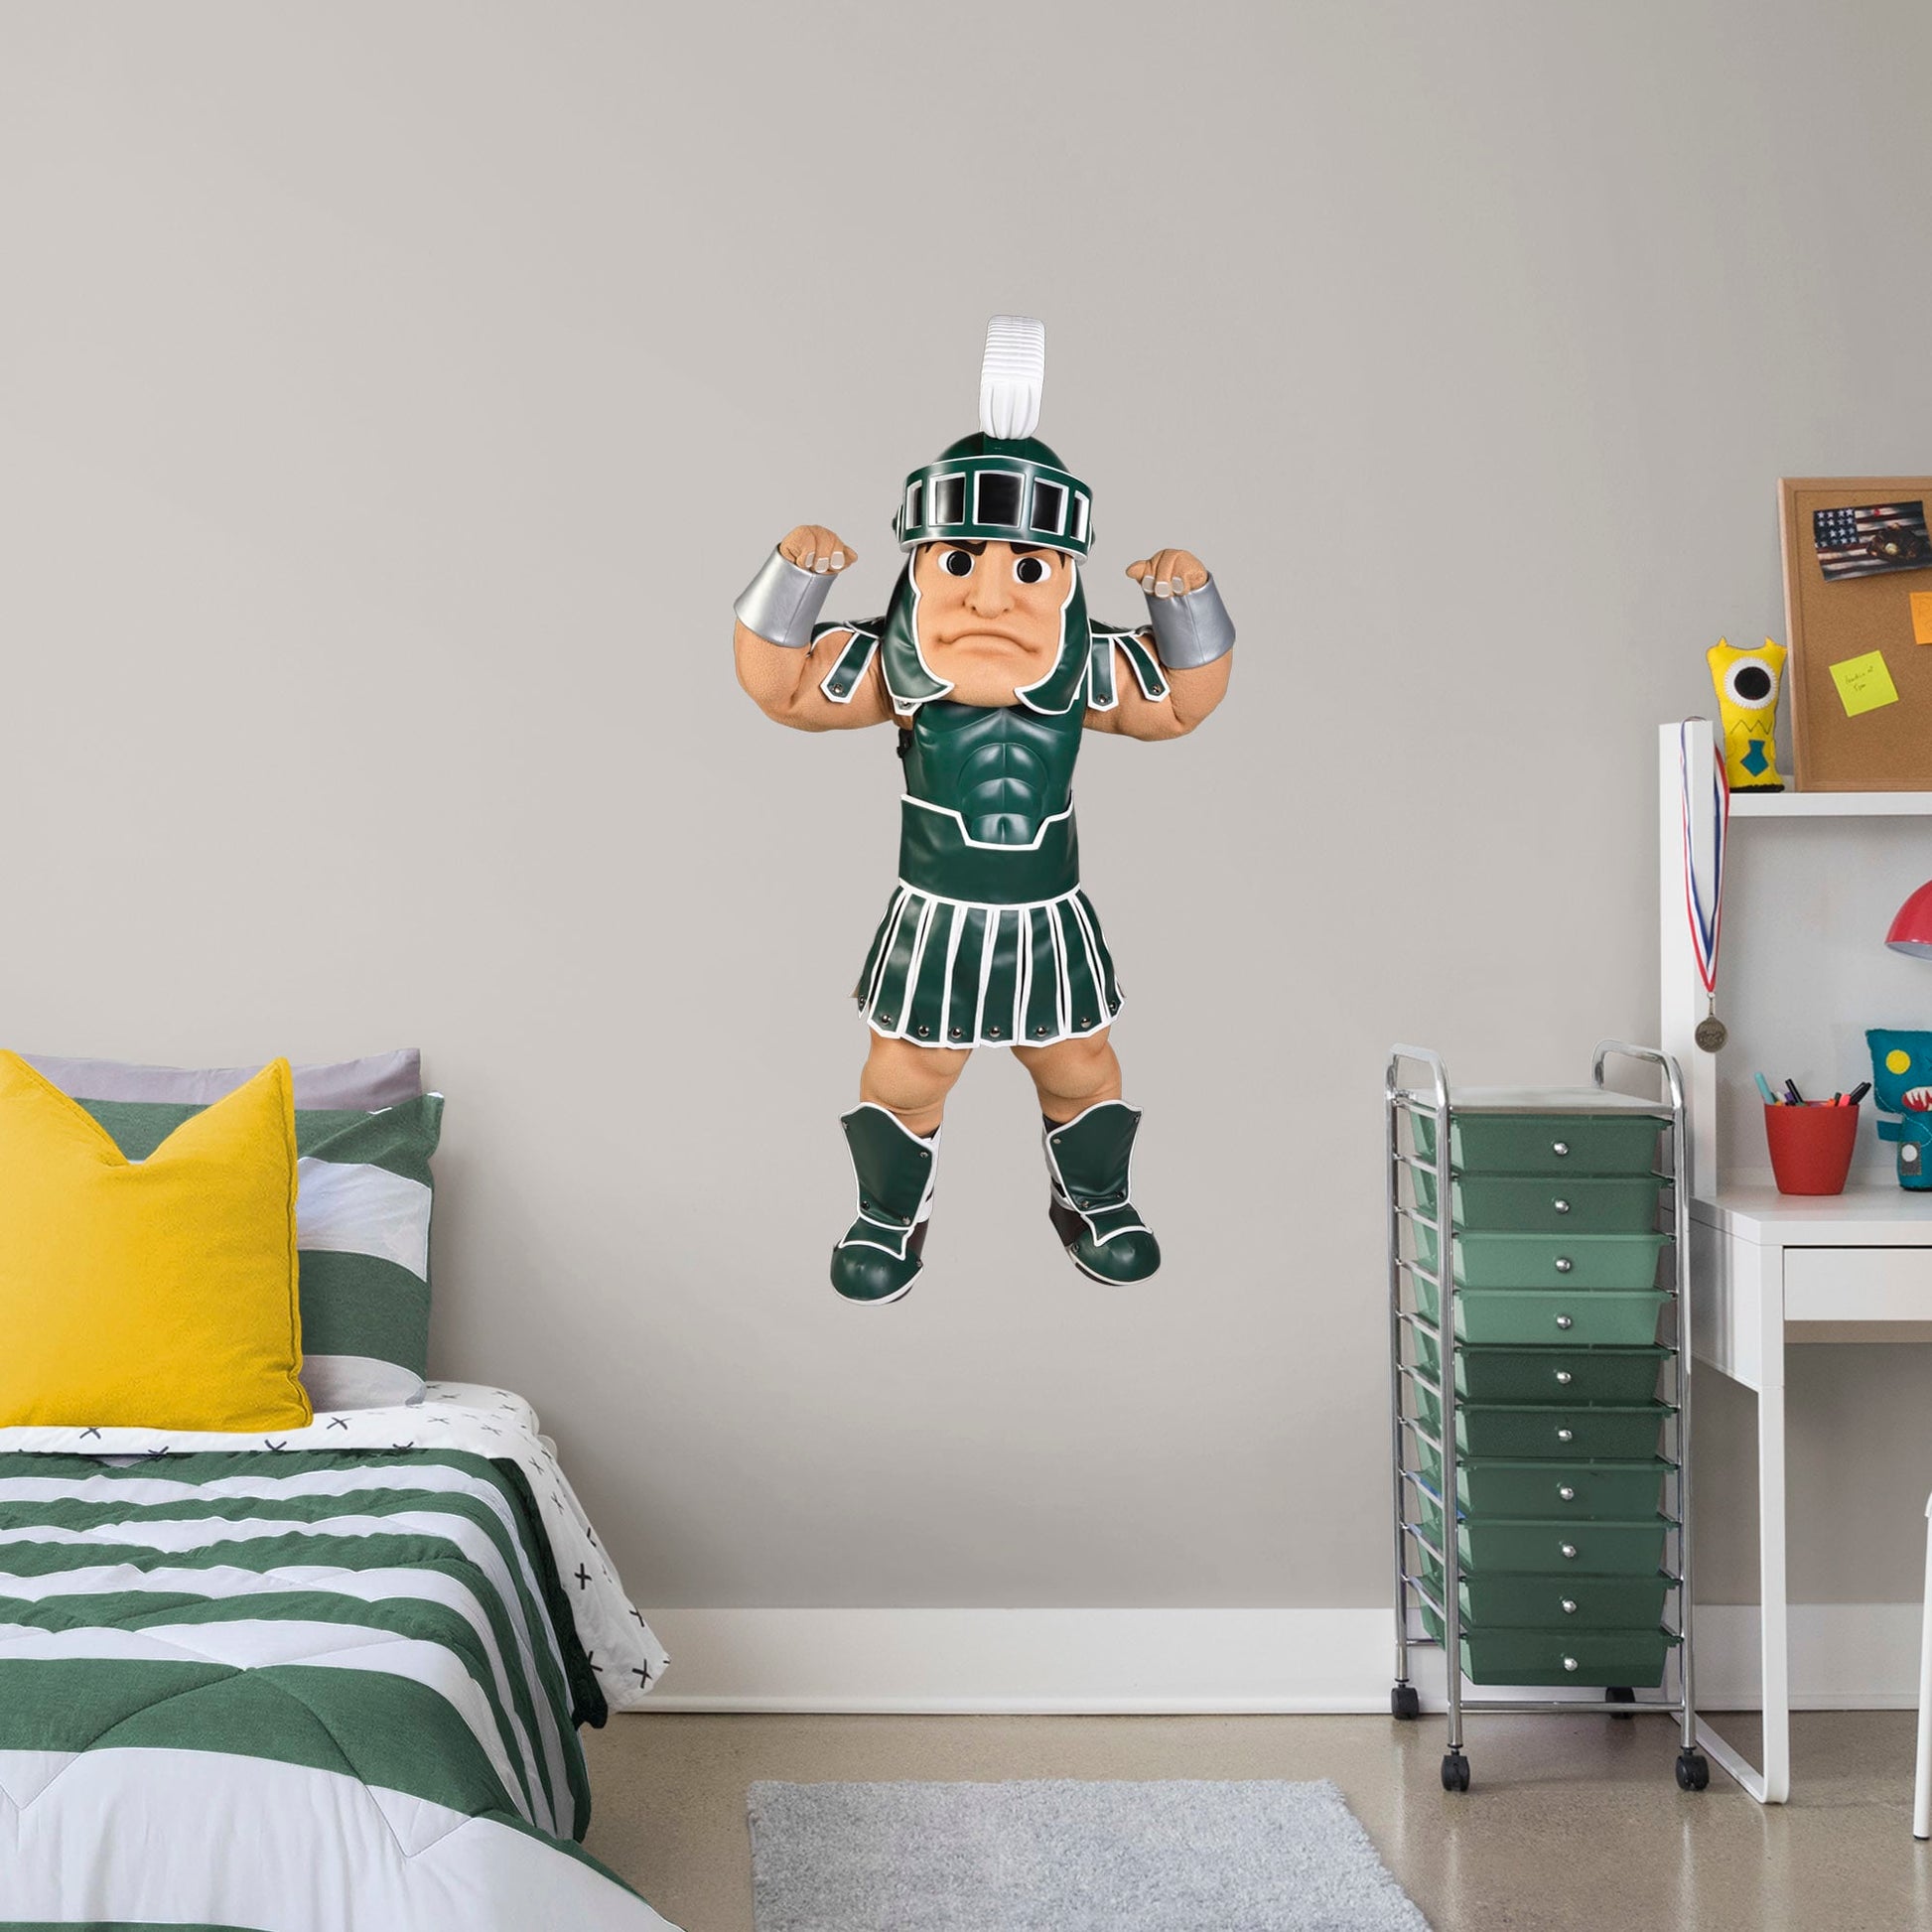 Giant Mascot + 2 Decals (26"W x 54"H)